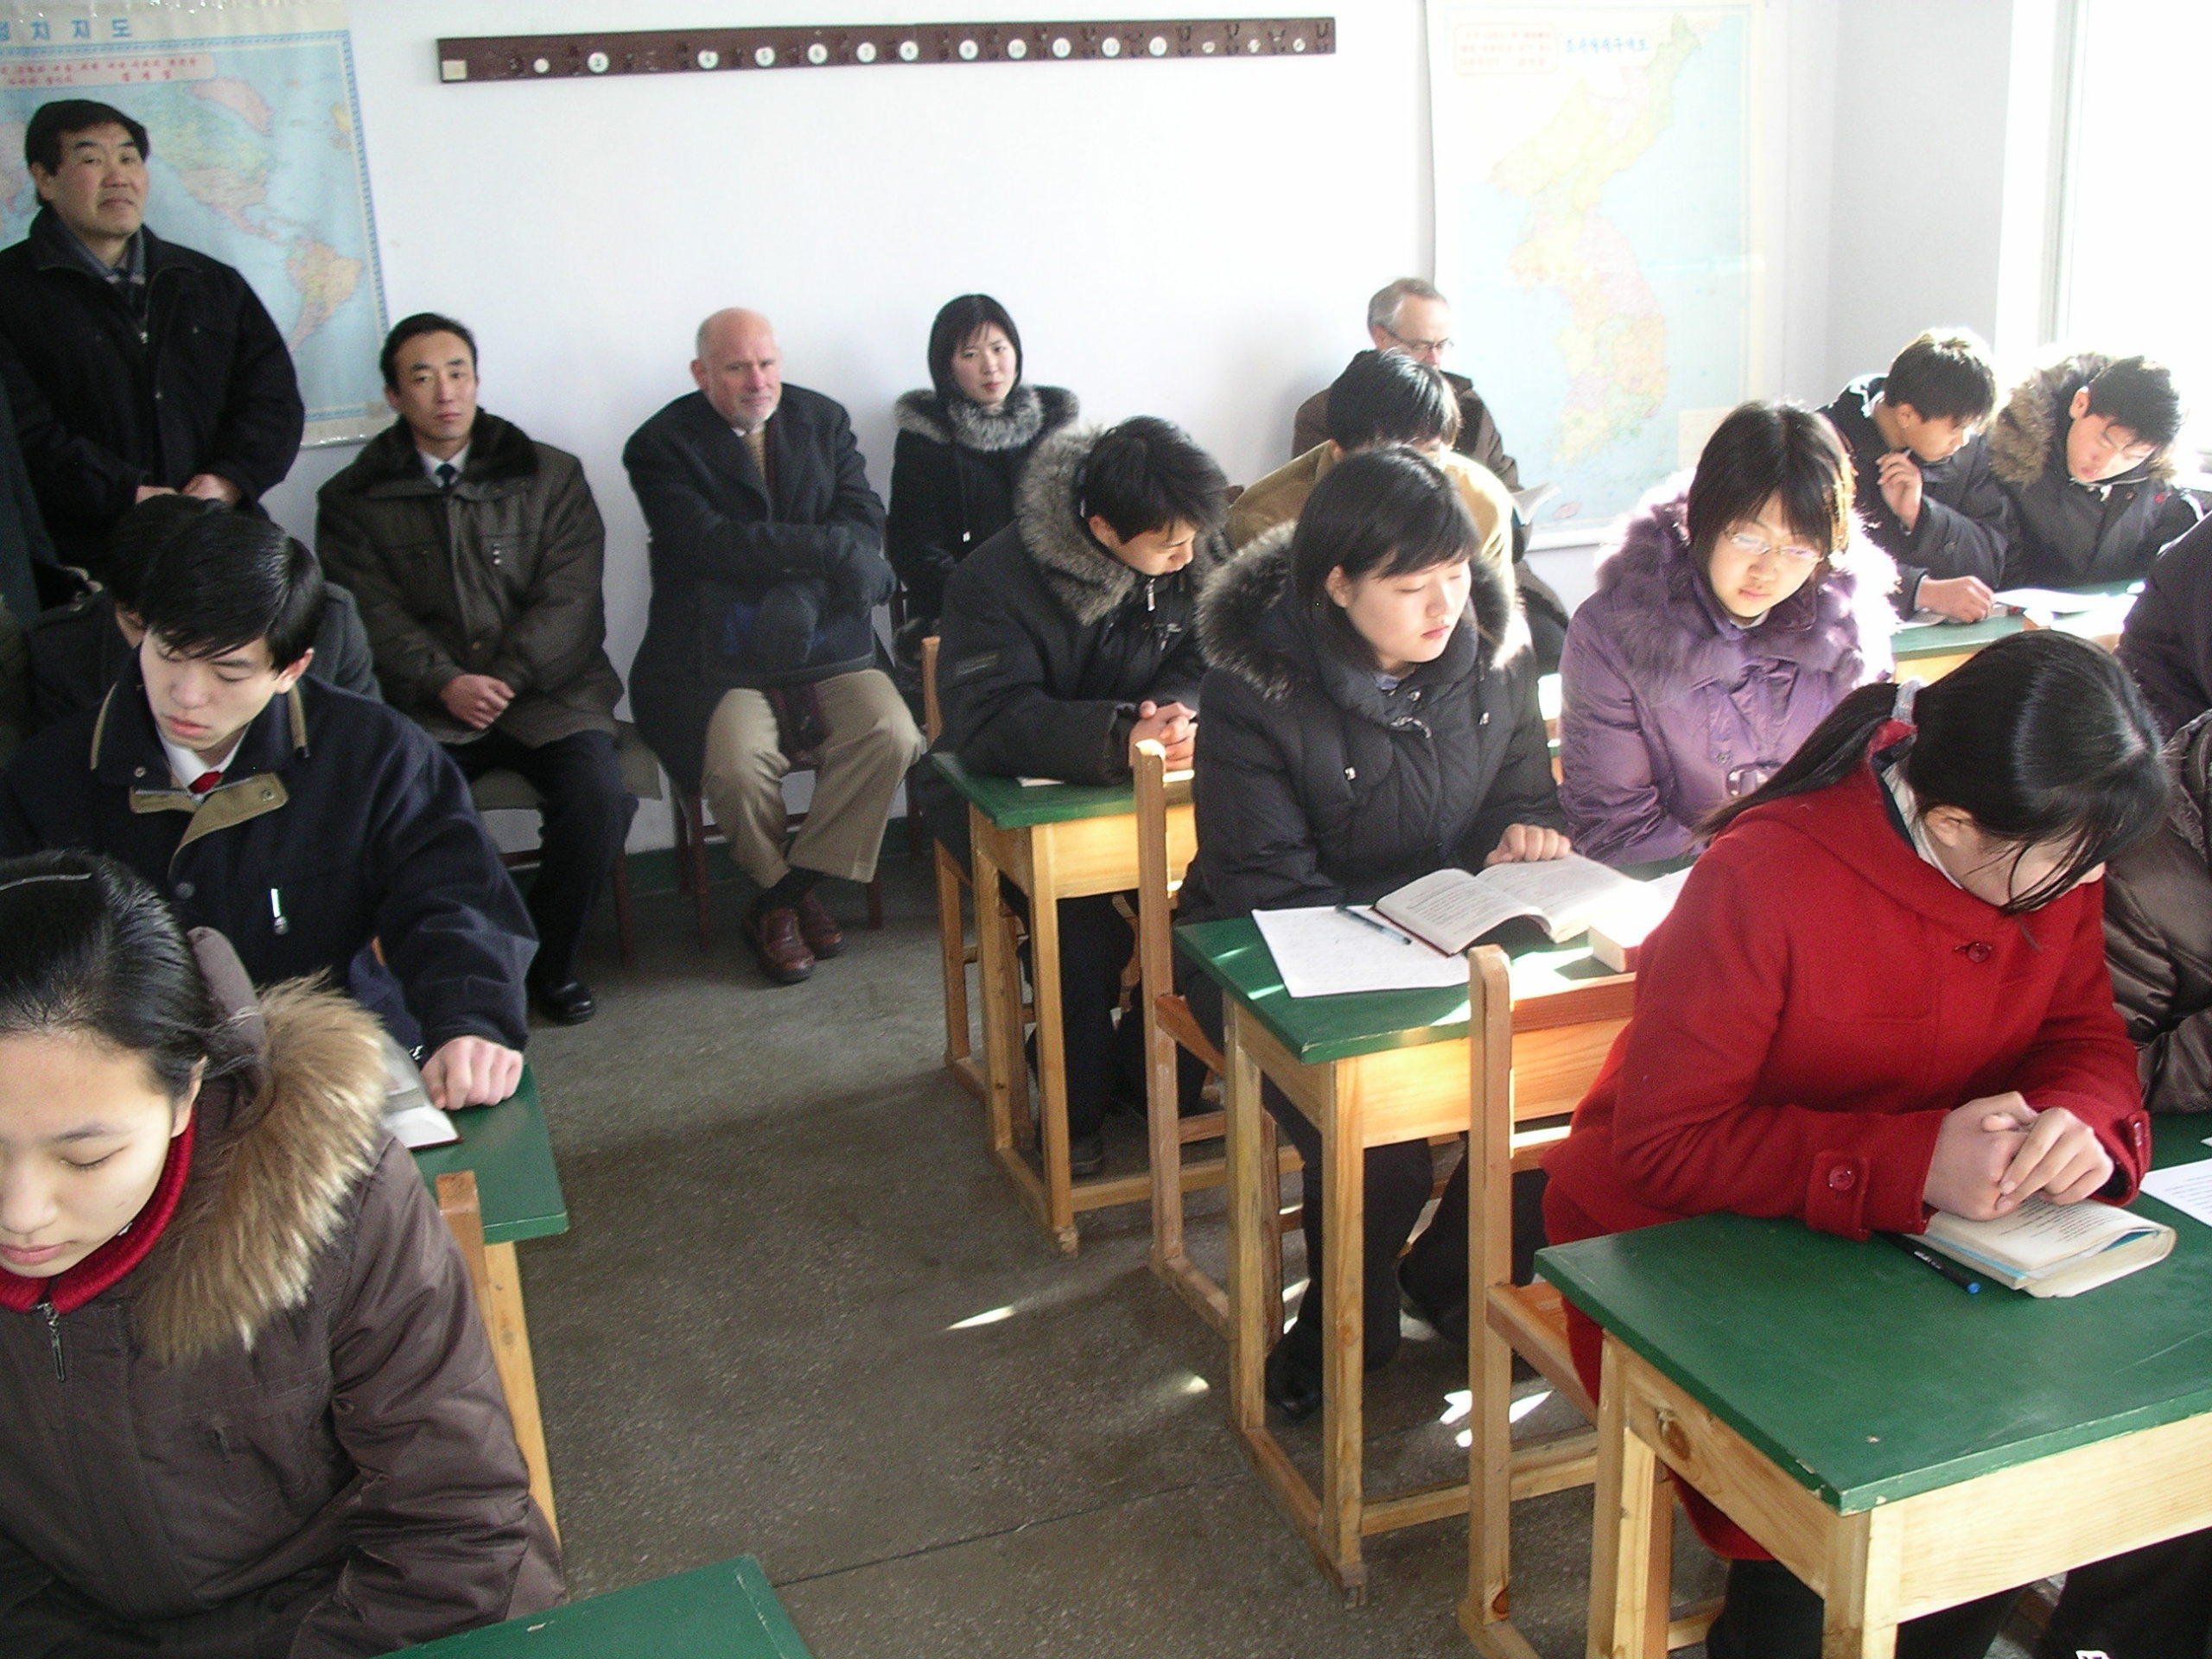 Classroom with warmly dressed students seated in pairs at desks. Visitors who look cold seated on chairs in the back of the room